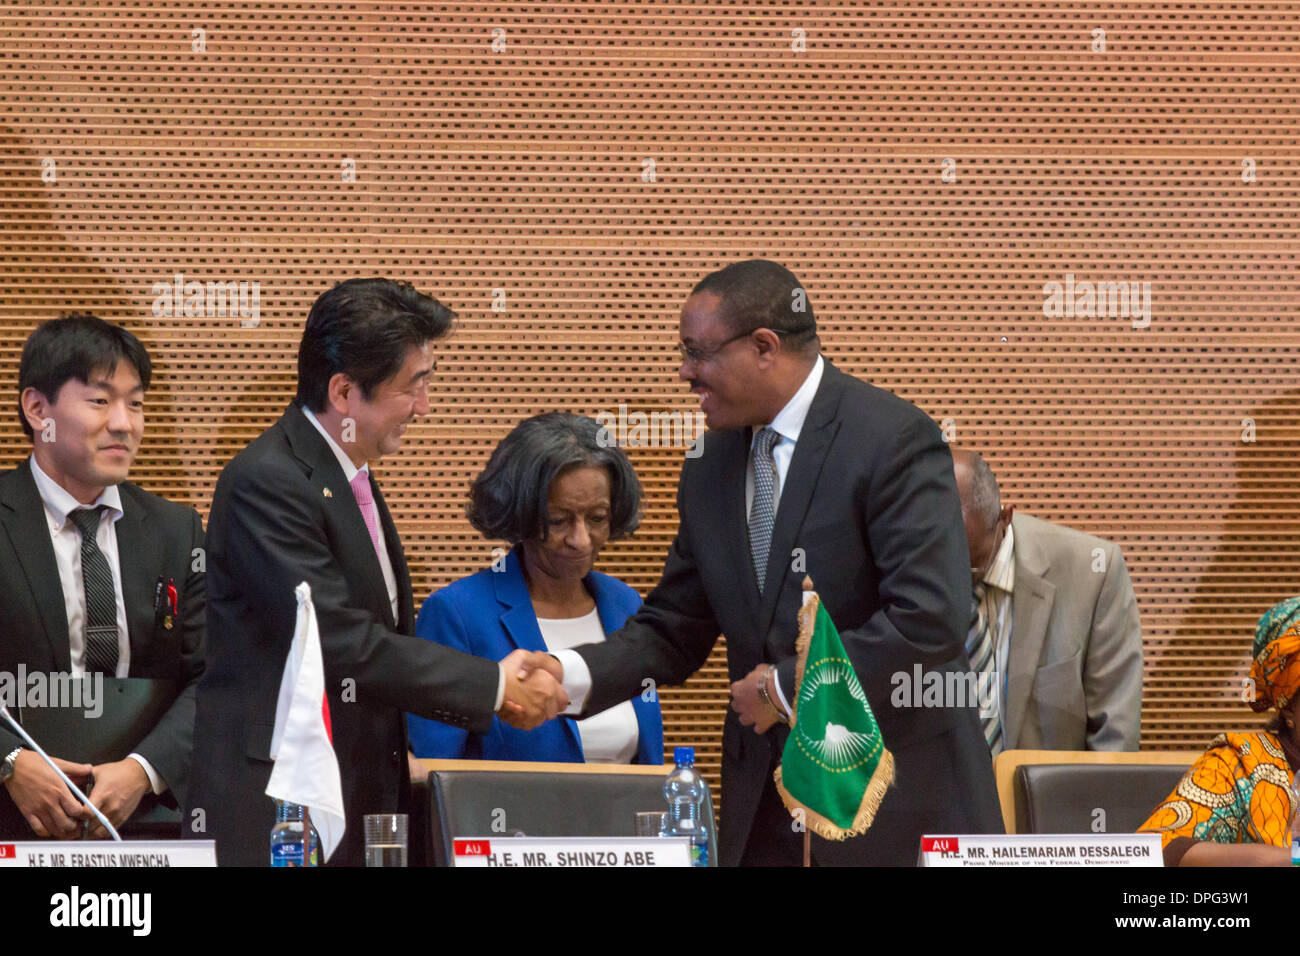 Addis Ababa, Ethiopia. 14th January 2014. H.E. Mr. Hailemariam Dessalegn, Prime Minister of the Federal Republic of Ethiopia shakes hands with H.E. Mr. Shinzo Abe, Prime Miinister of Japan on January 14, 2014, at the African Union Headquarters in Addis Ababa, Ethiopia. Credit:  Dereje Belachew/Alamy Live News Stock Photo